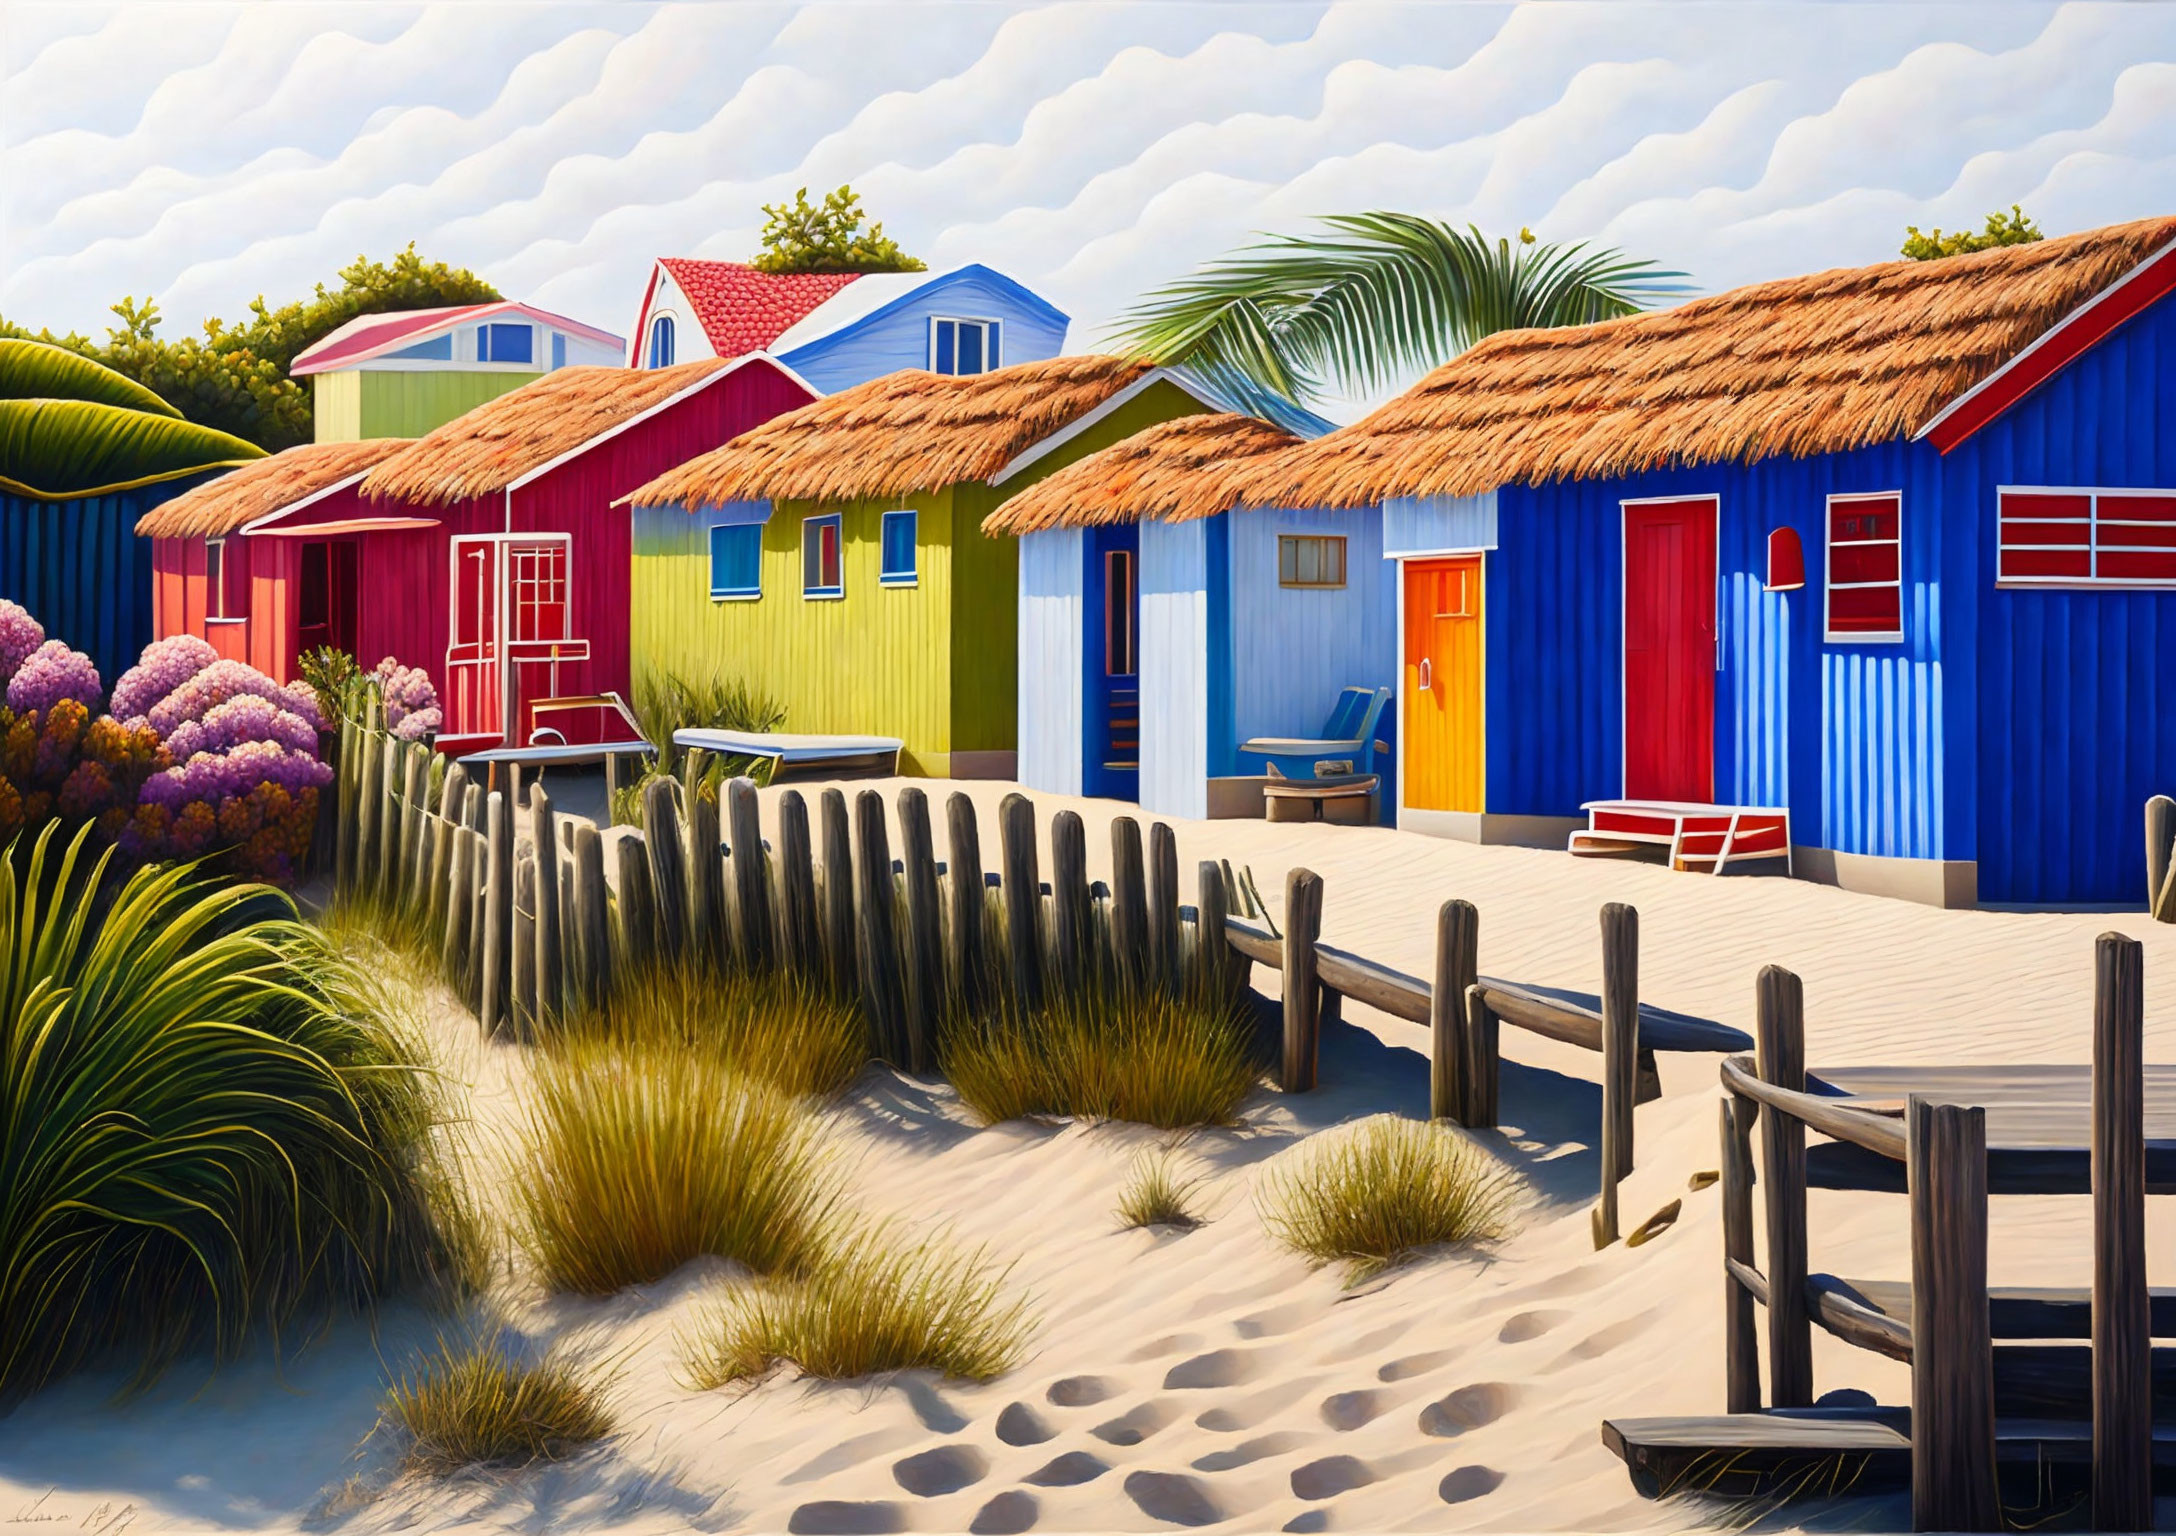 Vibrant beach huts with thatched roofs on sandy path amid greenery under blue sky